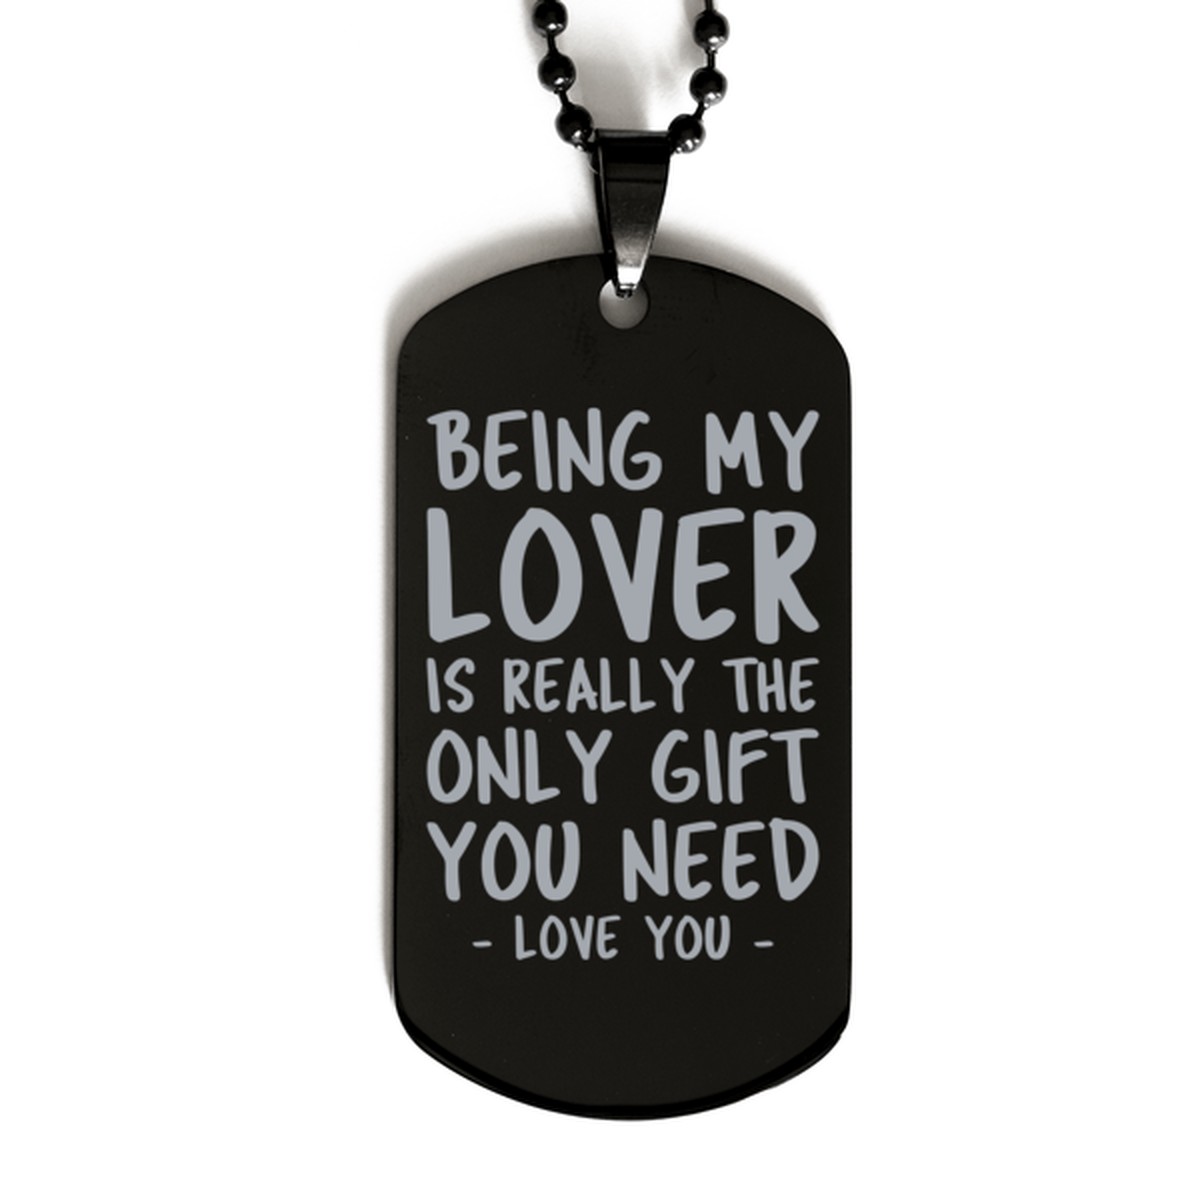 Funny Lover Black Dog Tag Necklace, Being My Lover Is Really the Only Gift You Need, Best Birthday Gifts for Lover